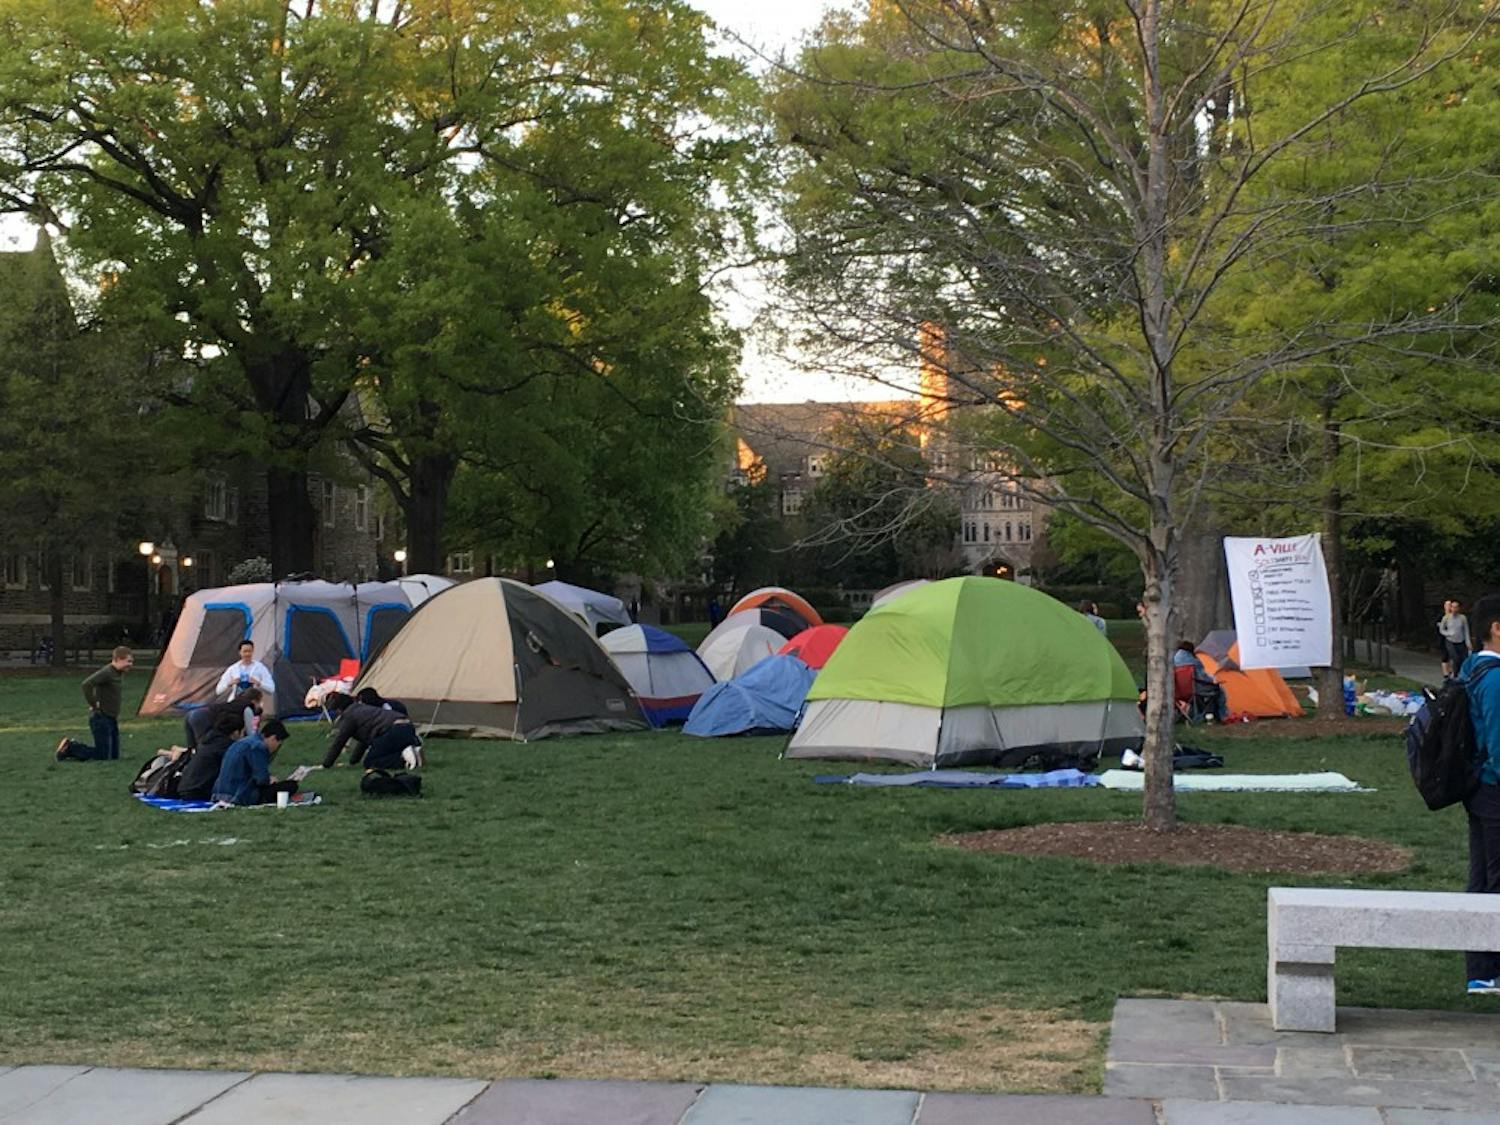  Protestors encamped on Abele Quad eat dinner before the sun sets over Duke University on Monday evening. Volunteer faculty and organizations such as the Duke Center for Multicultural Affairs donated seventeen tents, food and other supplies to the protesters.